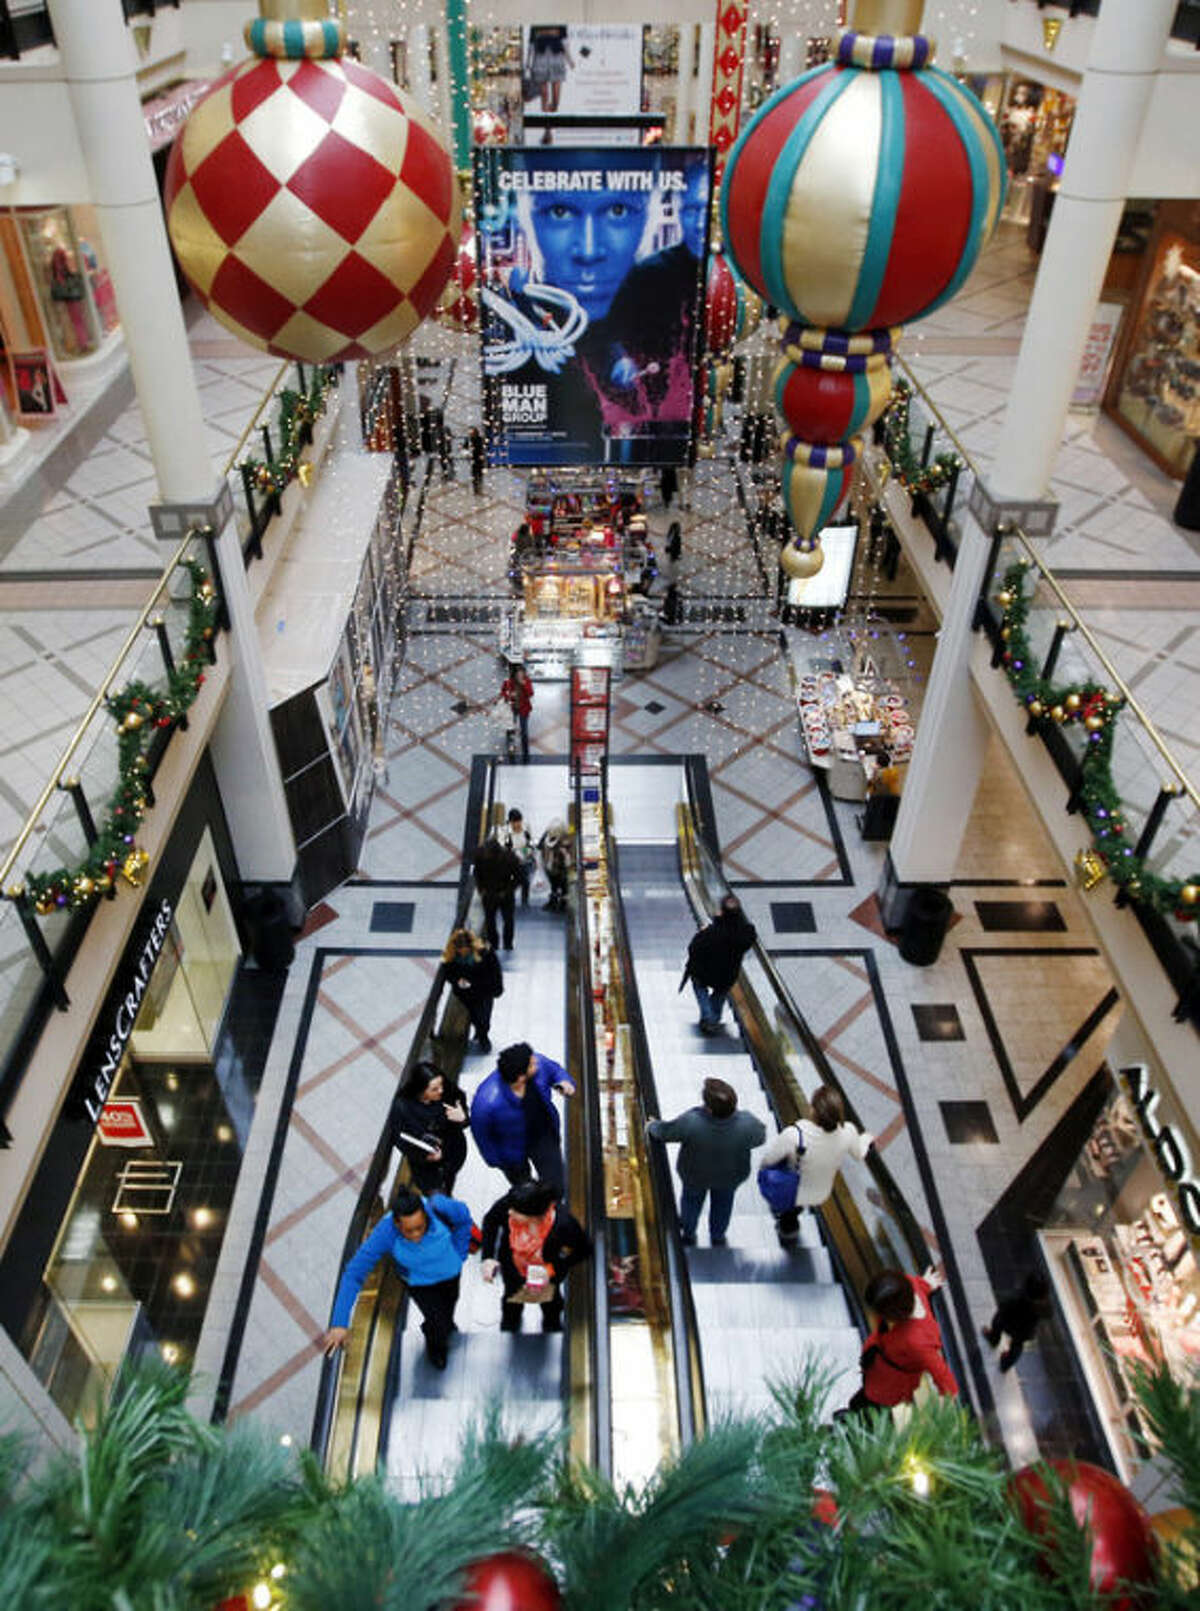 Shoppers ride escalators in a mall in Cambridge, Mass., Tuesday, Nov. 26, 2013. Shoppers in many states will line up for deals hours after their Thanksgiving dinners, but stores in a handful of states are barred by law from opening on the holiday. Rhode Island, Massachusetts and Maine have so-called ?“blue laws?” that bar many big stores from opening Thursday. (AP Photo/Elise Amendola)